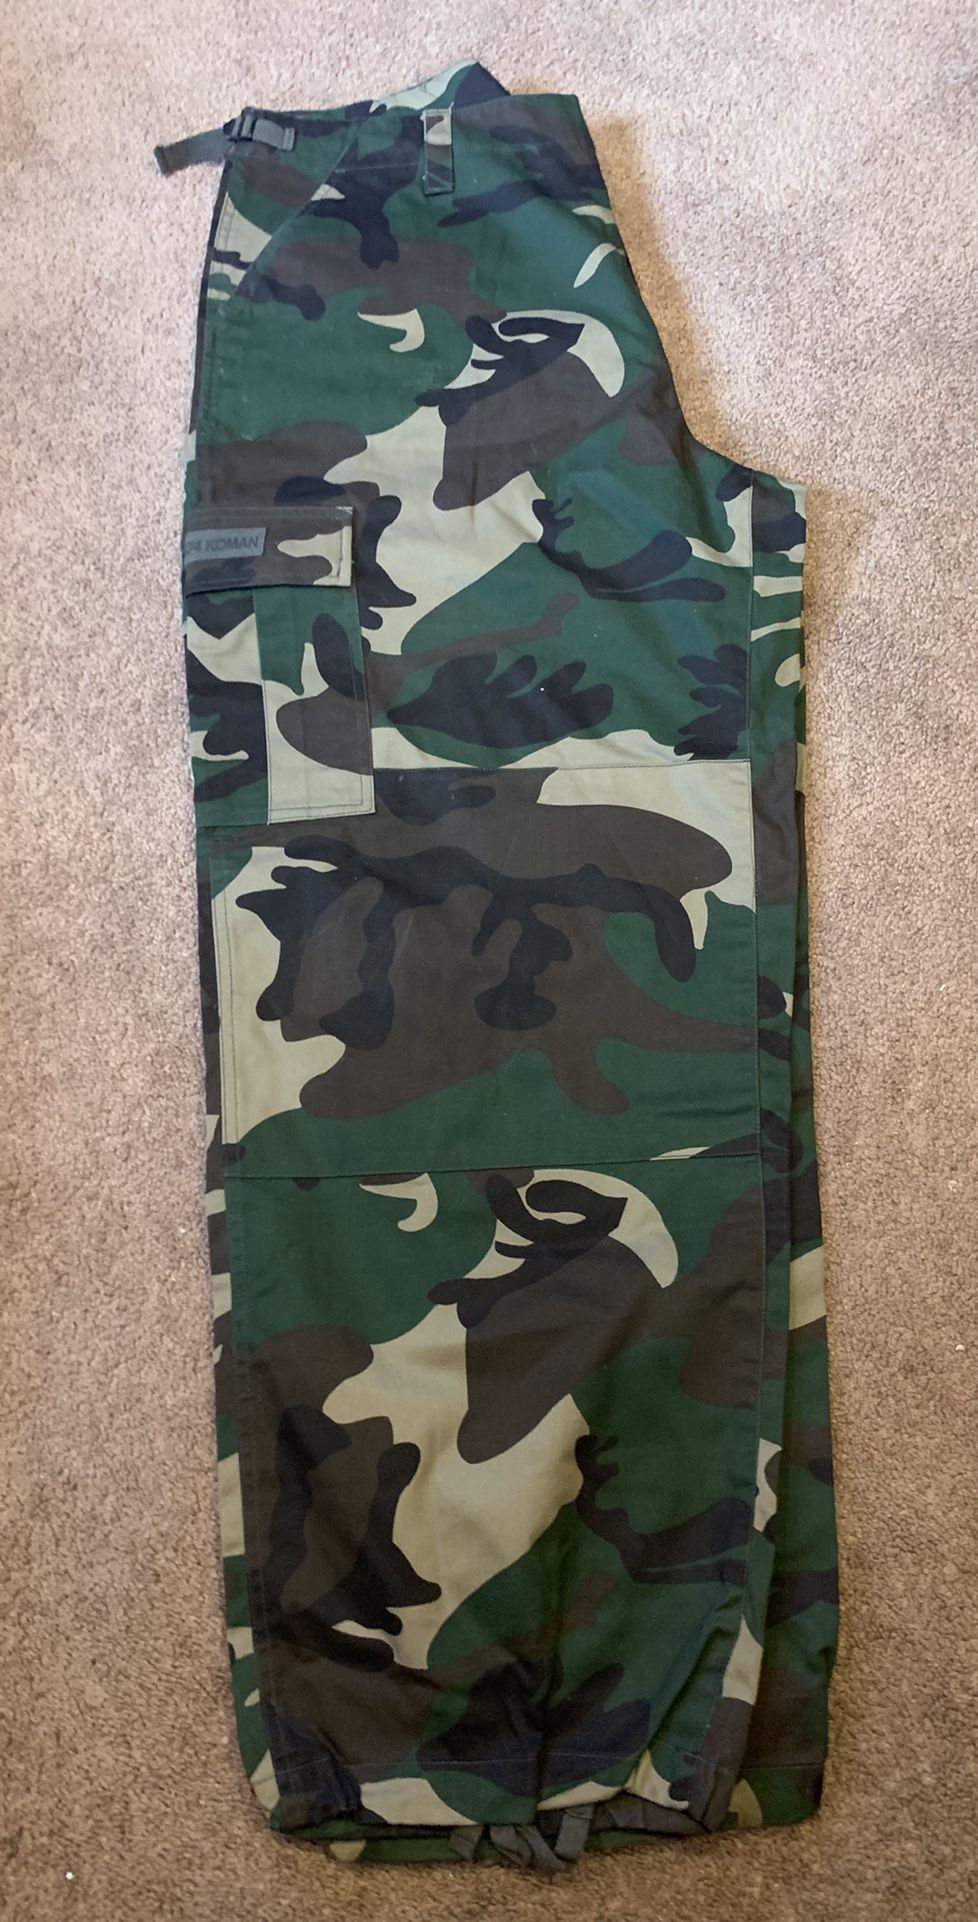 US74 Koman Camouflage Men's Army Cargo Pants Ralaxed Fit Green Camo Size 3XL